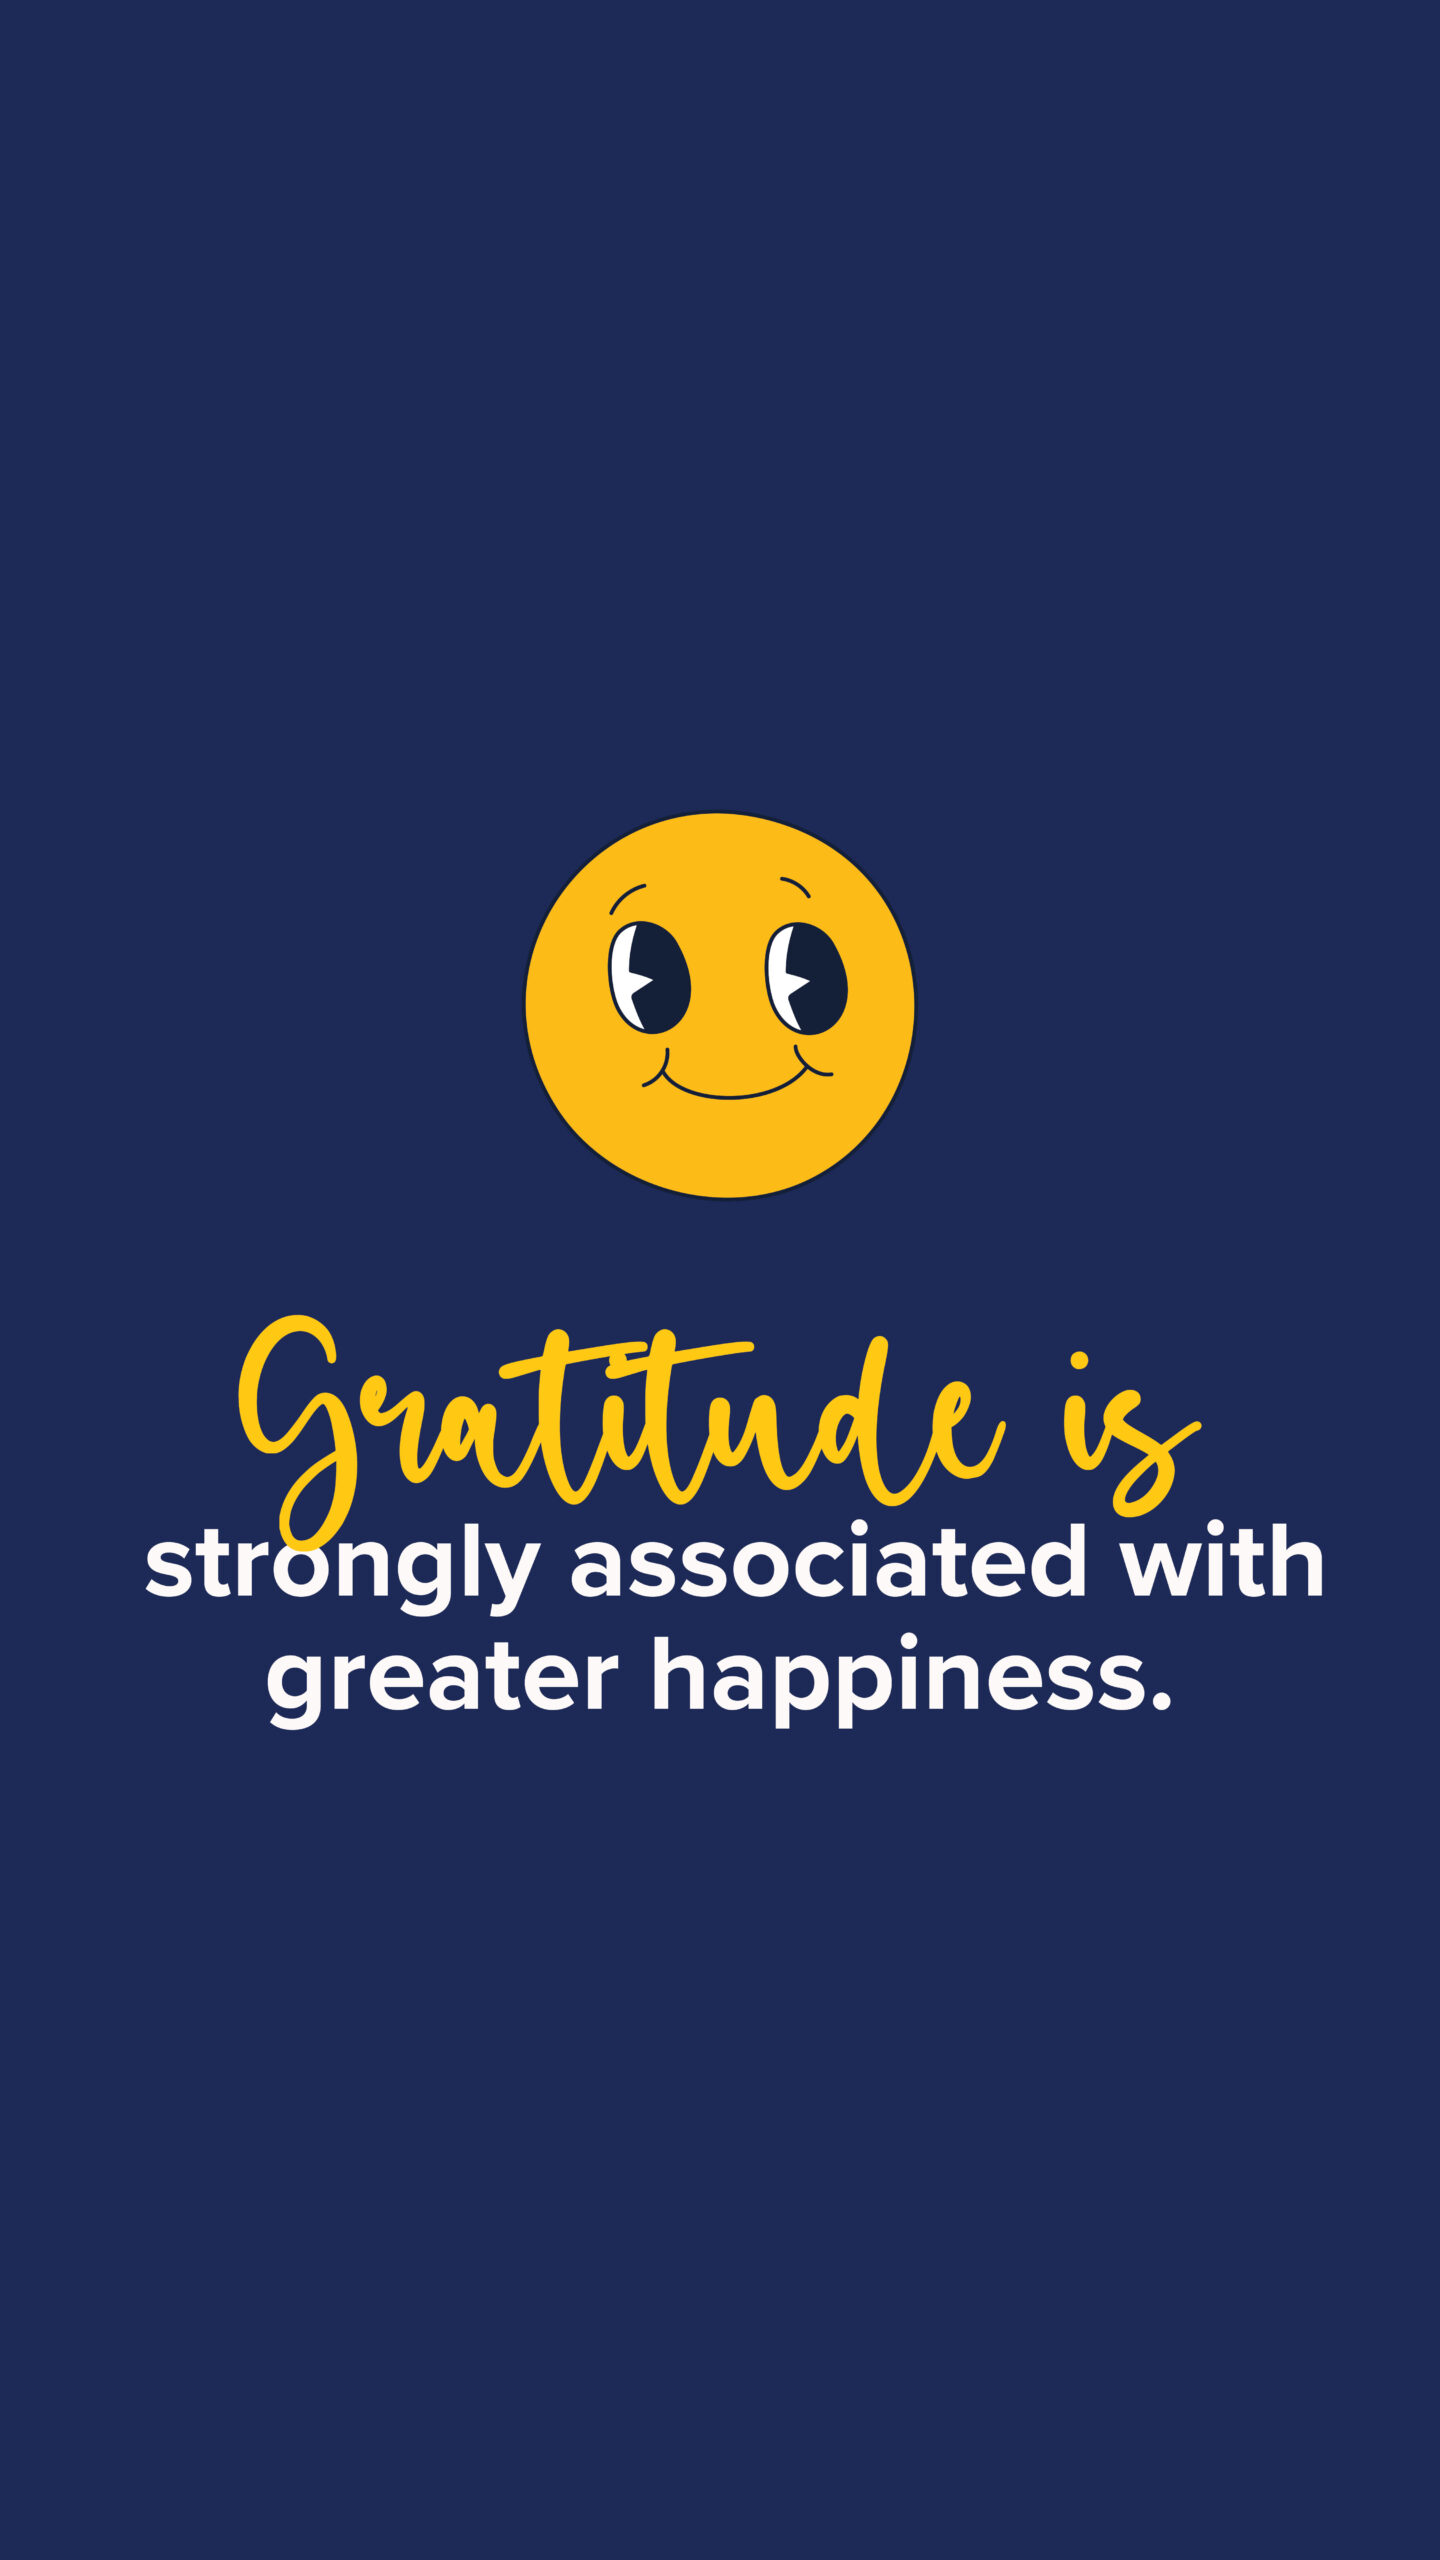 Gratitude is strongly associated with greater happiness. graphics